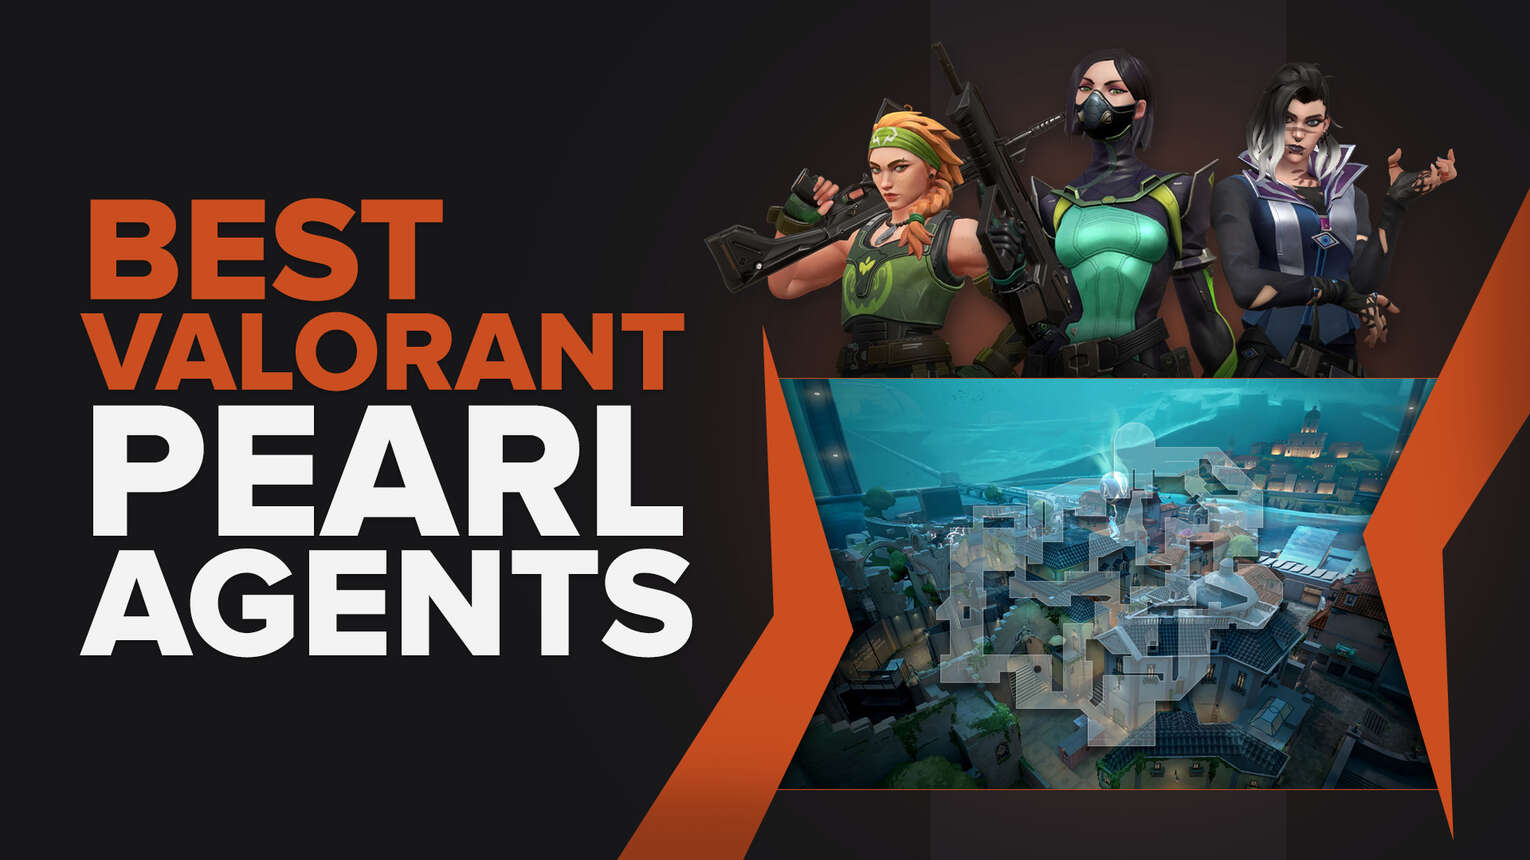 The Best Valorant Agents for Pearl